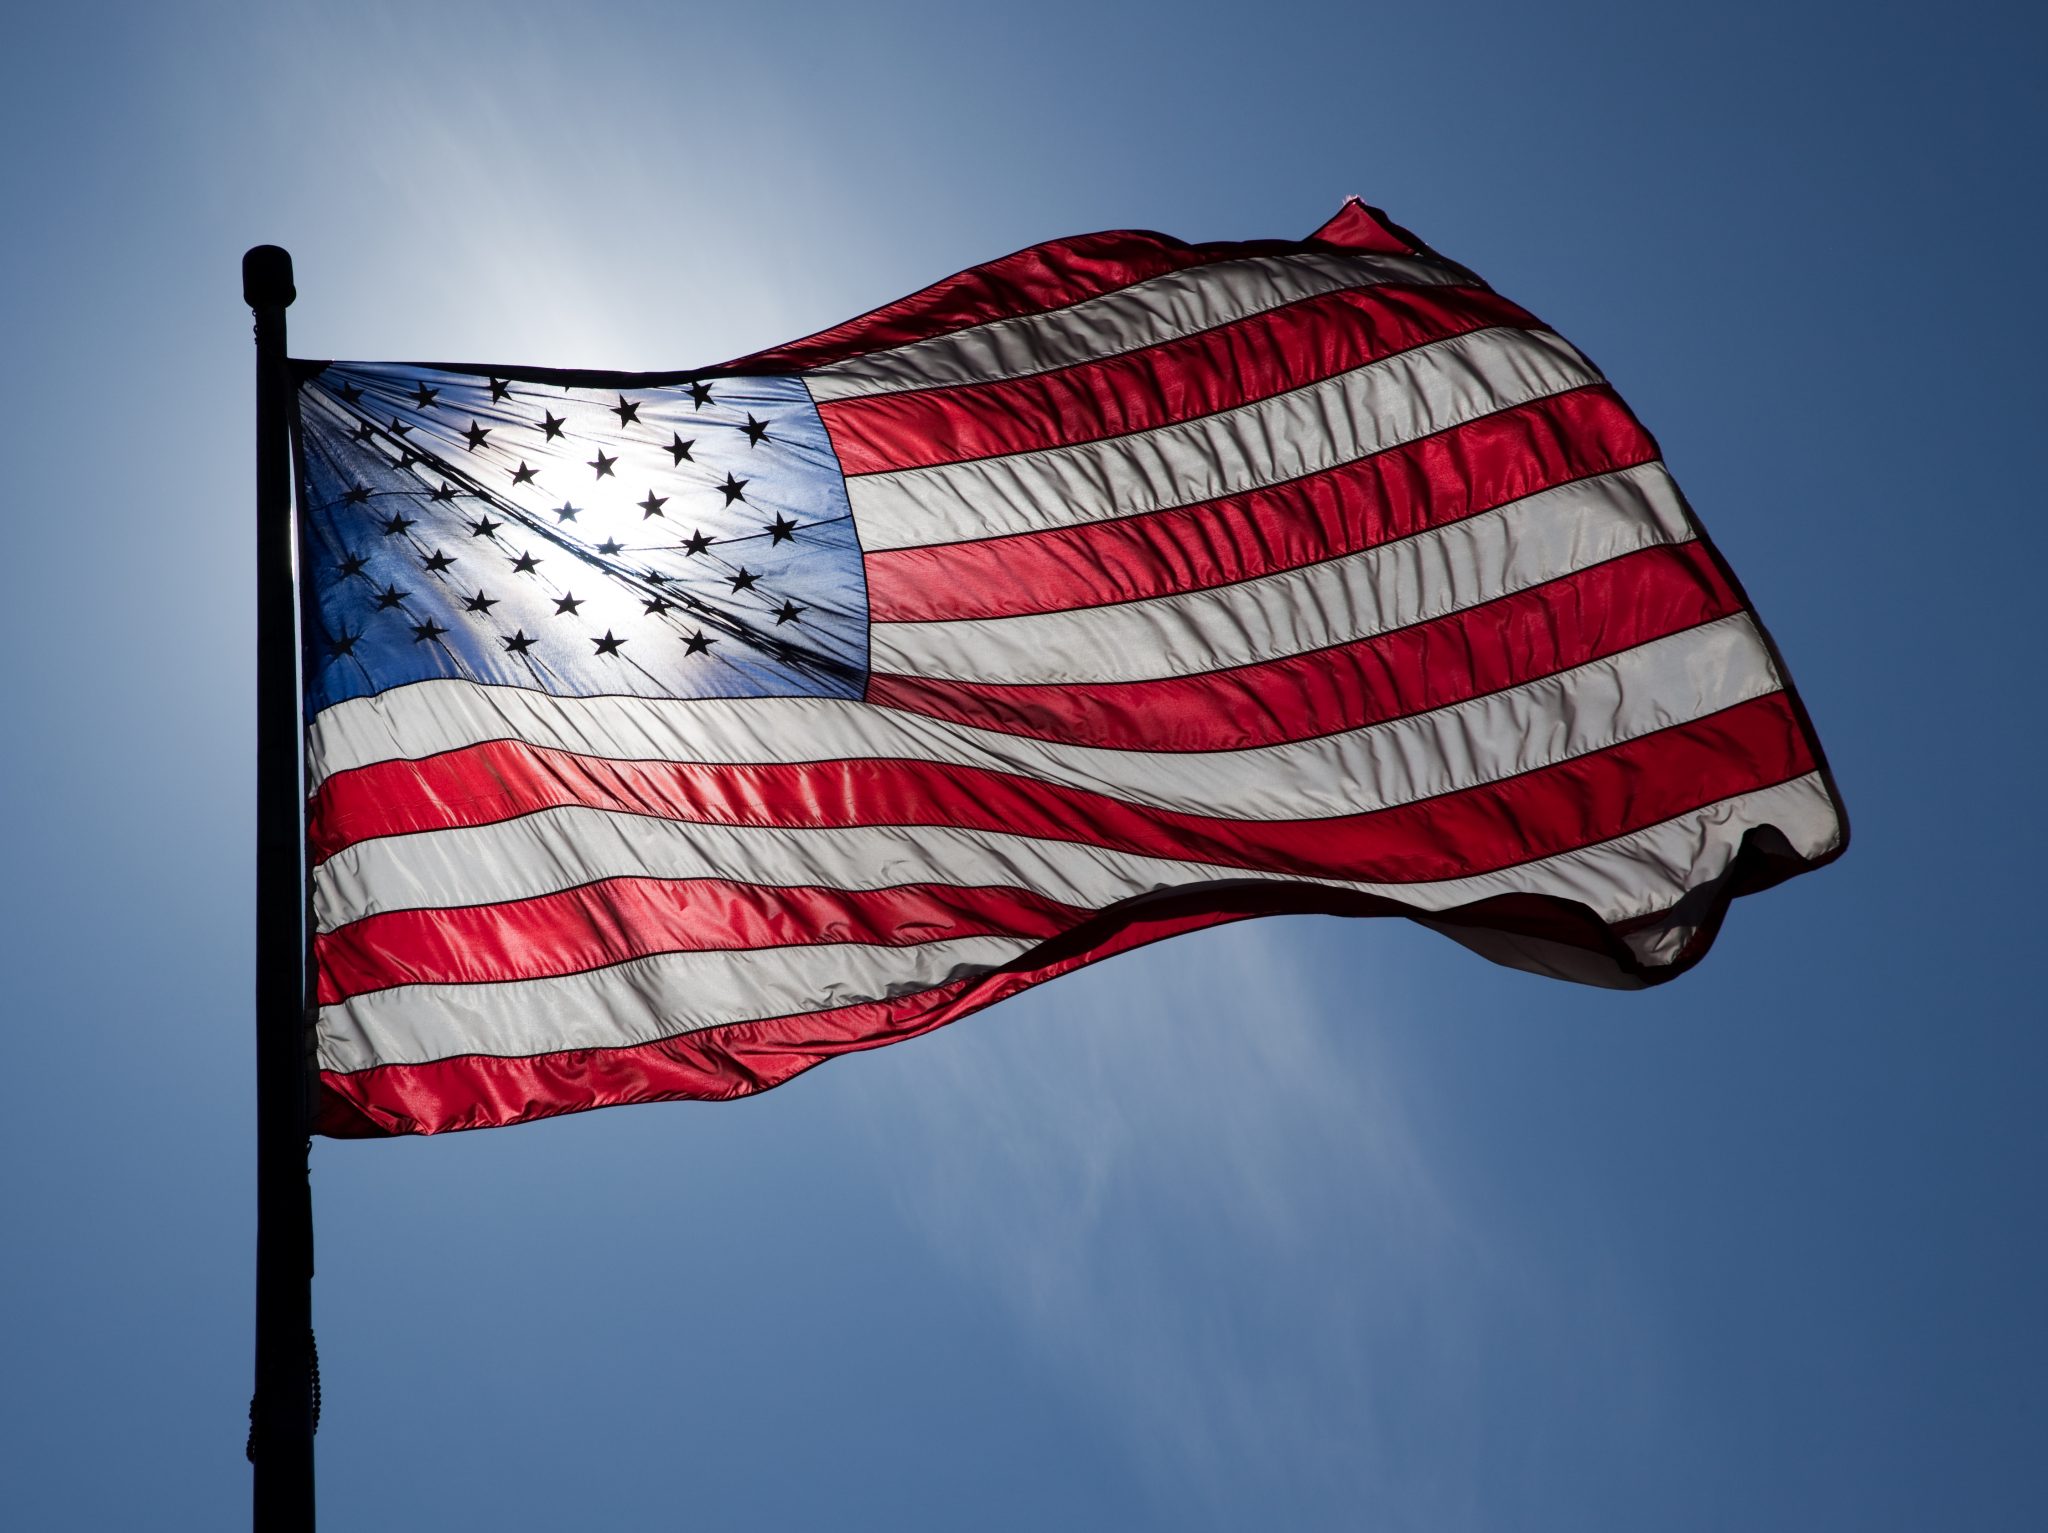 An American flag. The sun is behind it, shining through the stars on the flag.